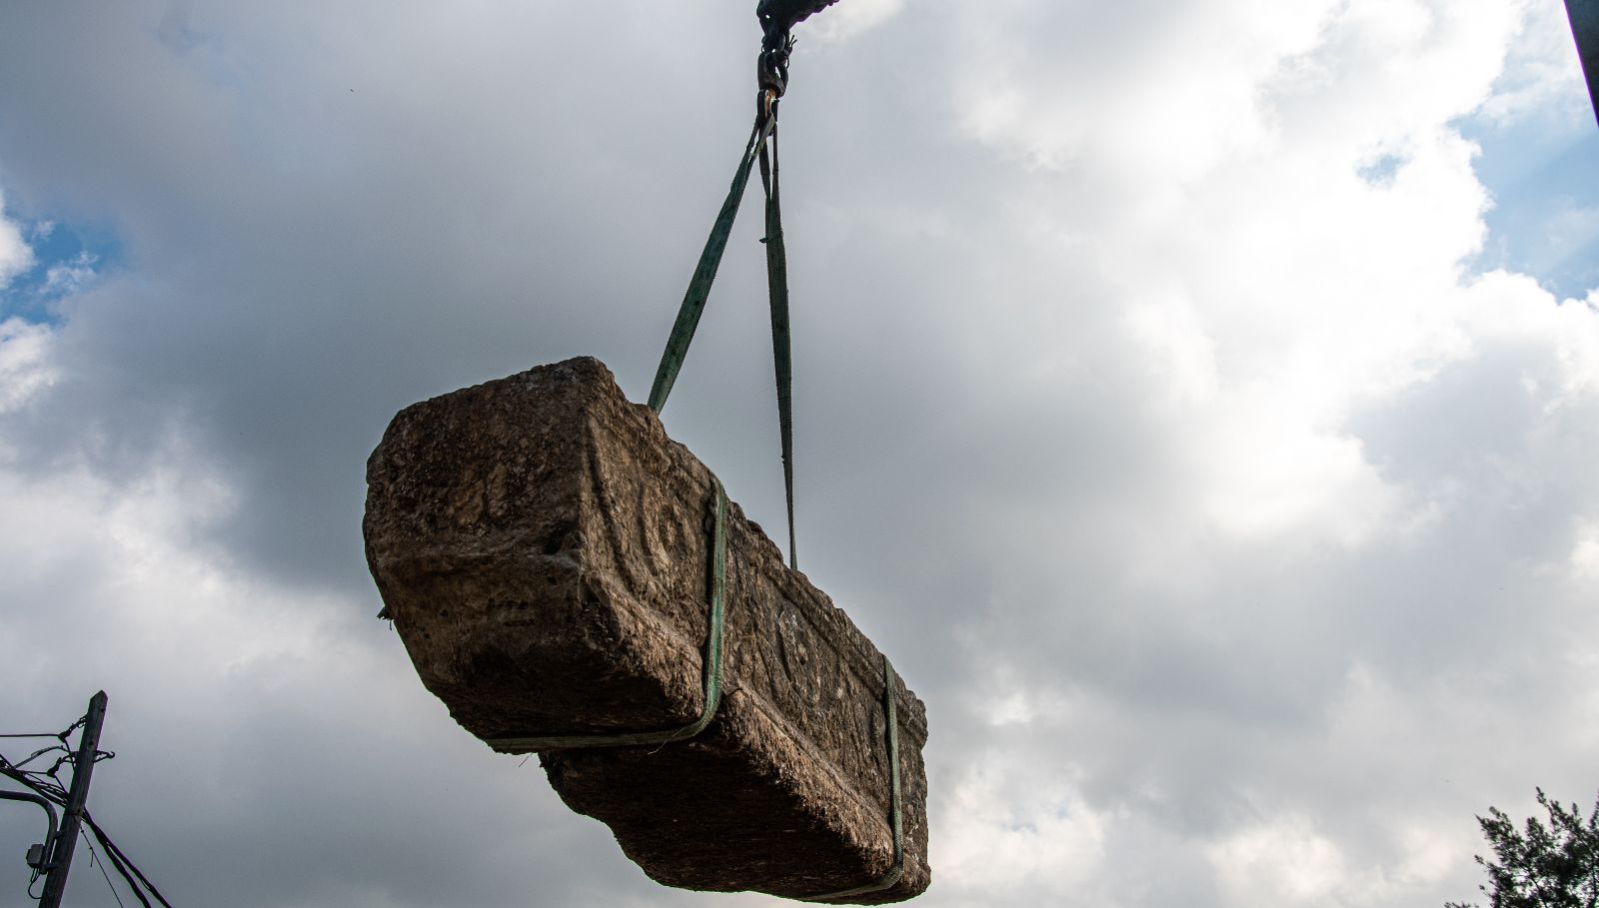 One of the ancient sarcophagi unearthed at the Ramat Gan Safari Park hangs high off the ground. Photo by Yoli Schwartz/Israel Antiquities Authority